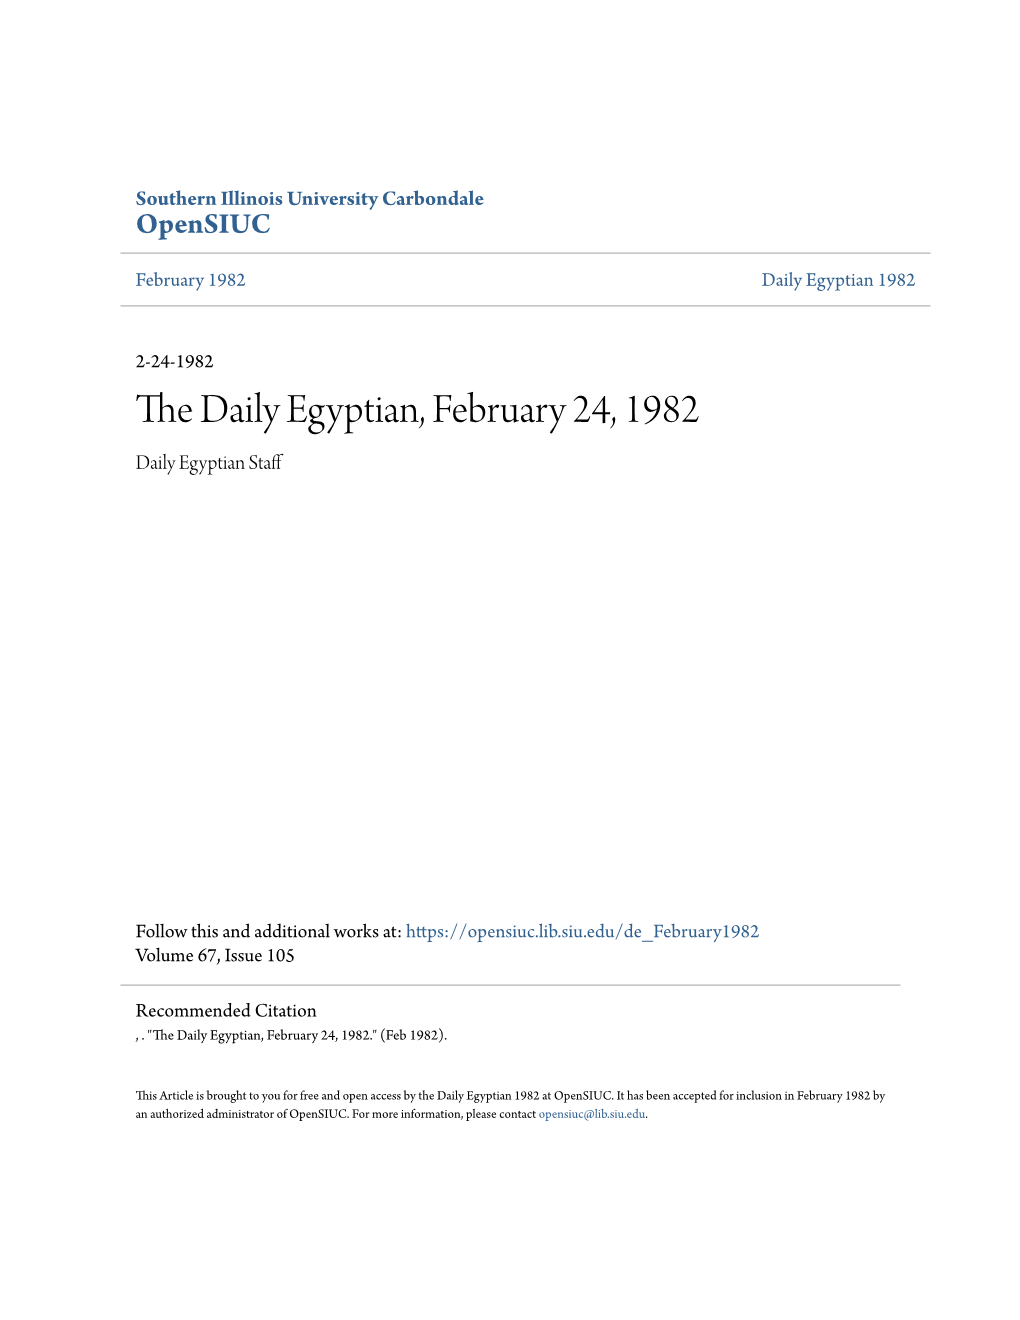 The Daily Egyptian, February 24, 1982